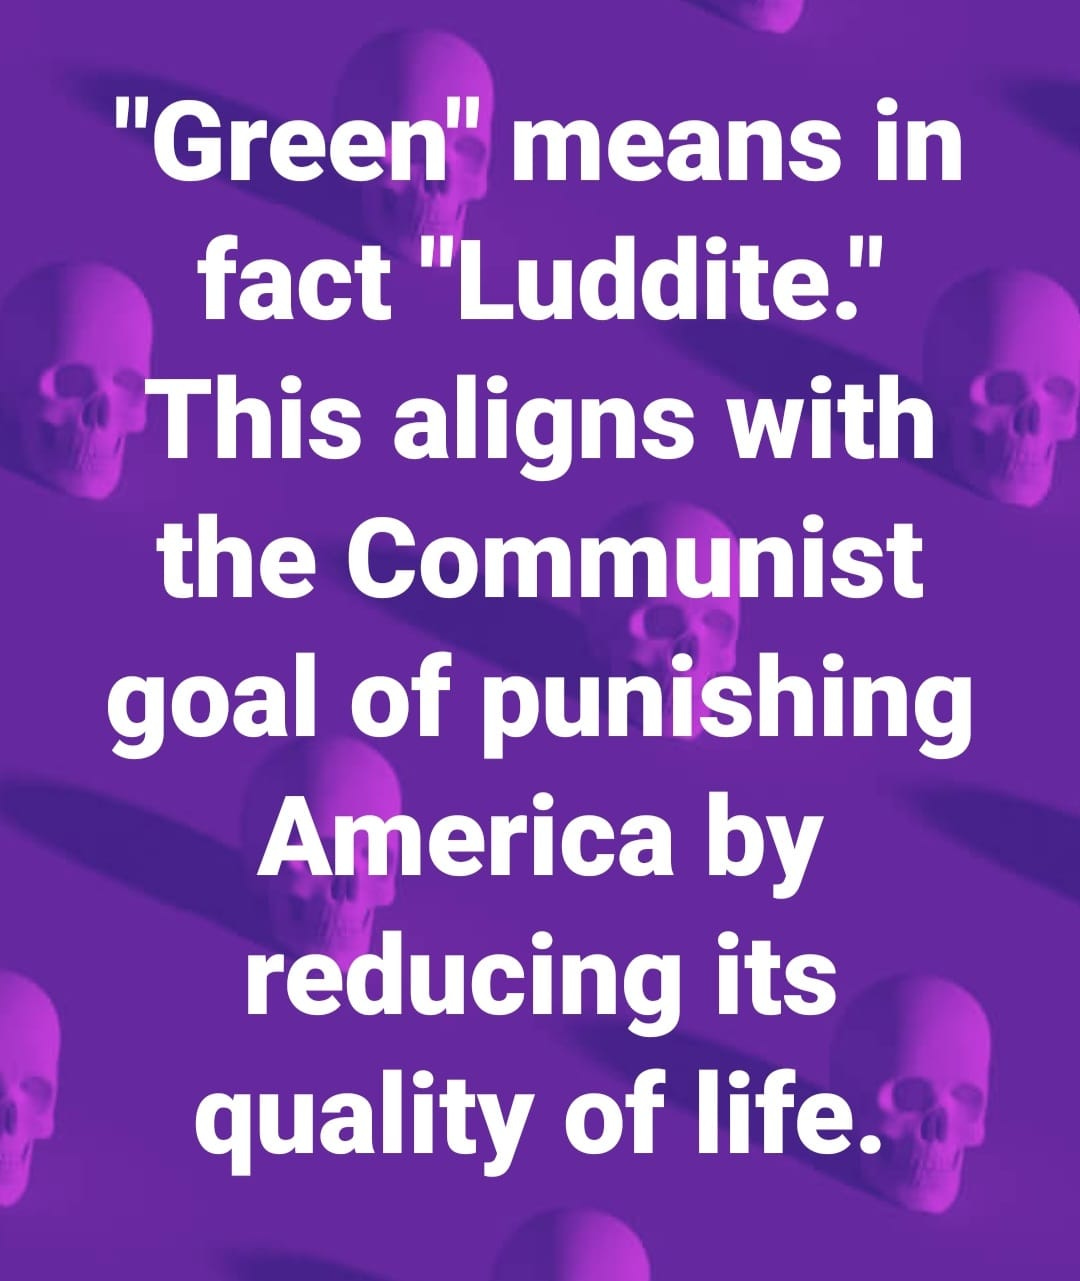 May be an image of 1 person and text that says '"Green" means in fact "Luddite." This aligns with the Communist goal of punishing America by reducing its quality of life.'